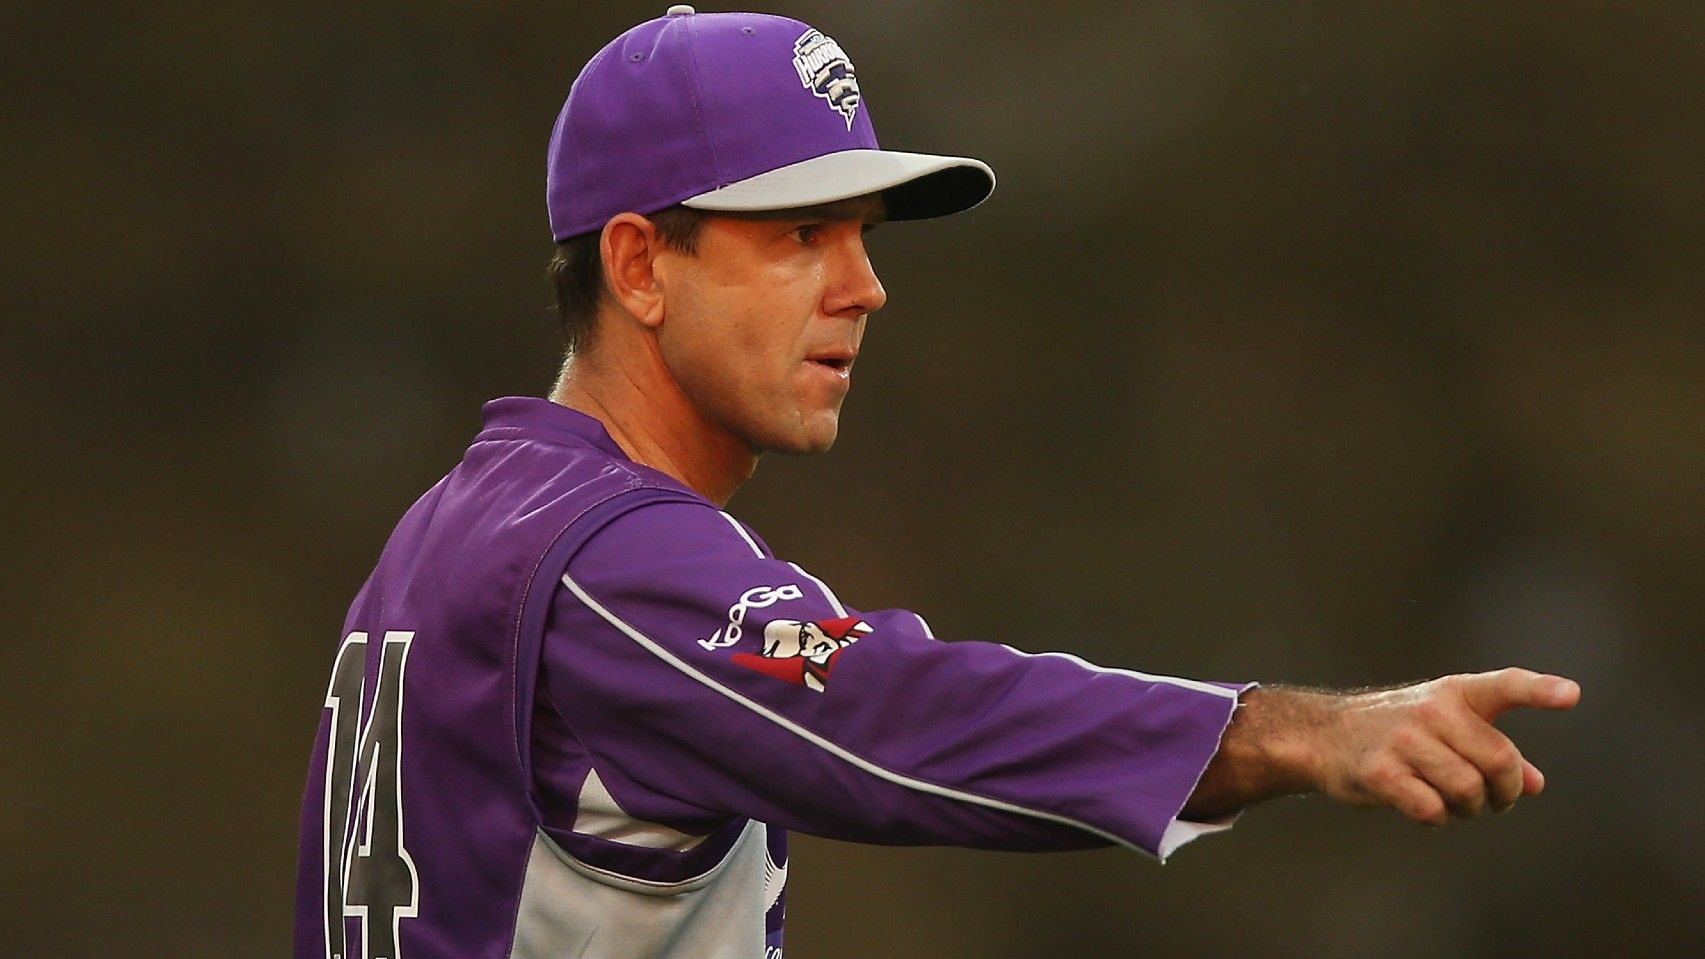 Ricky Ponting named head of strategy for Hobart Hurricanes